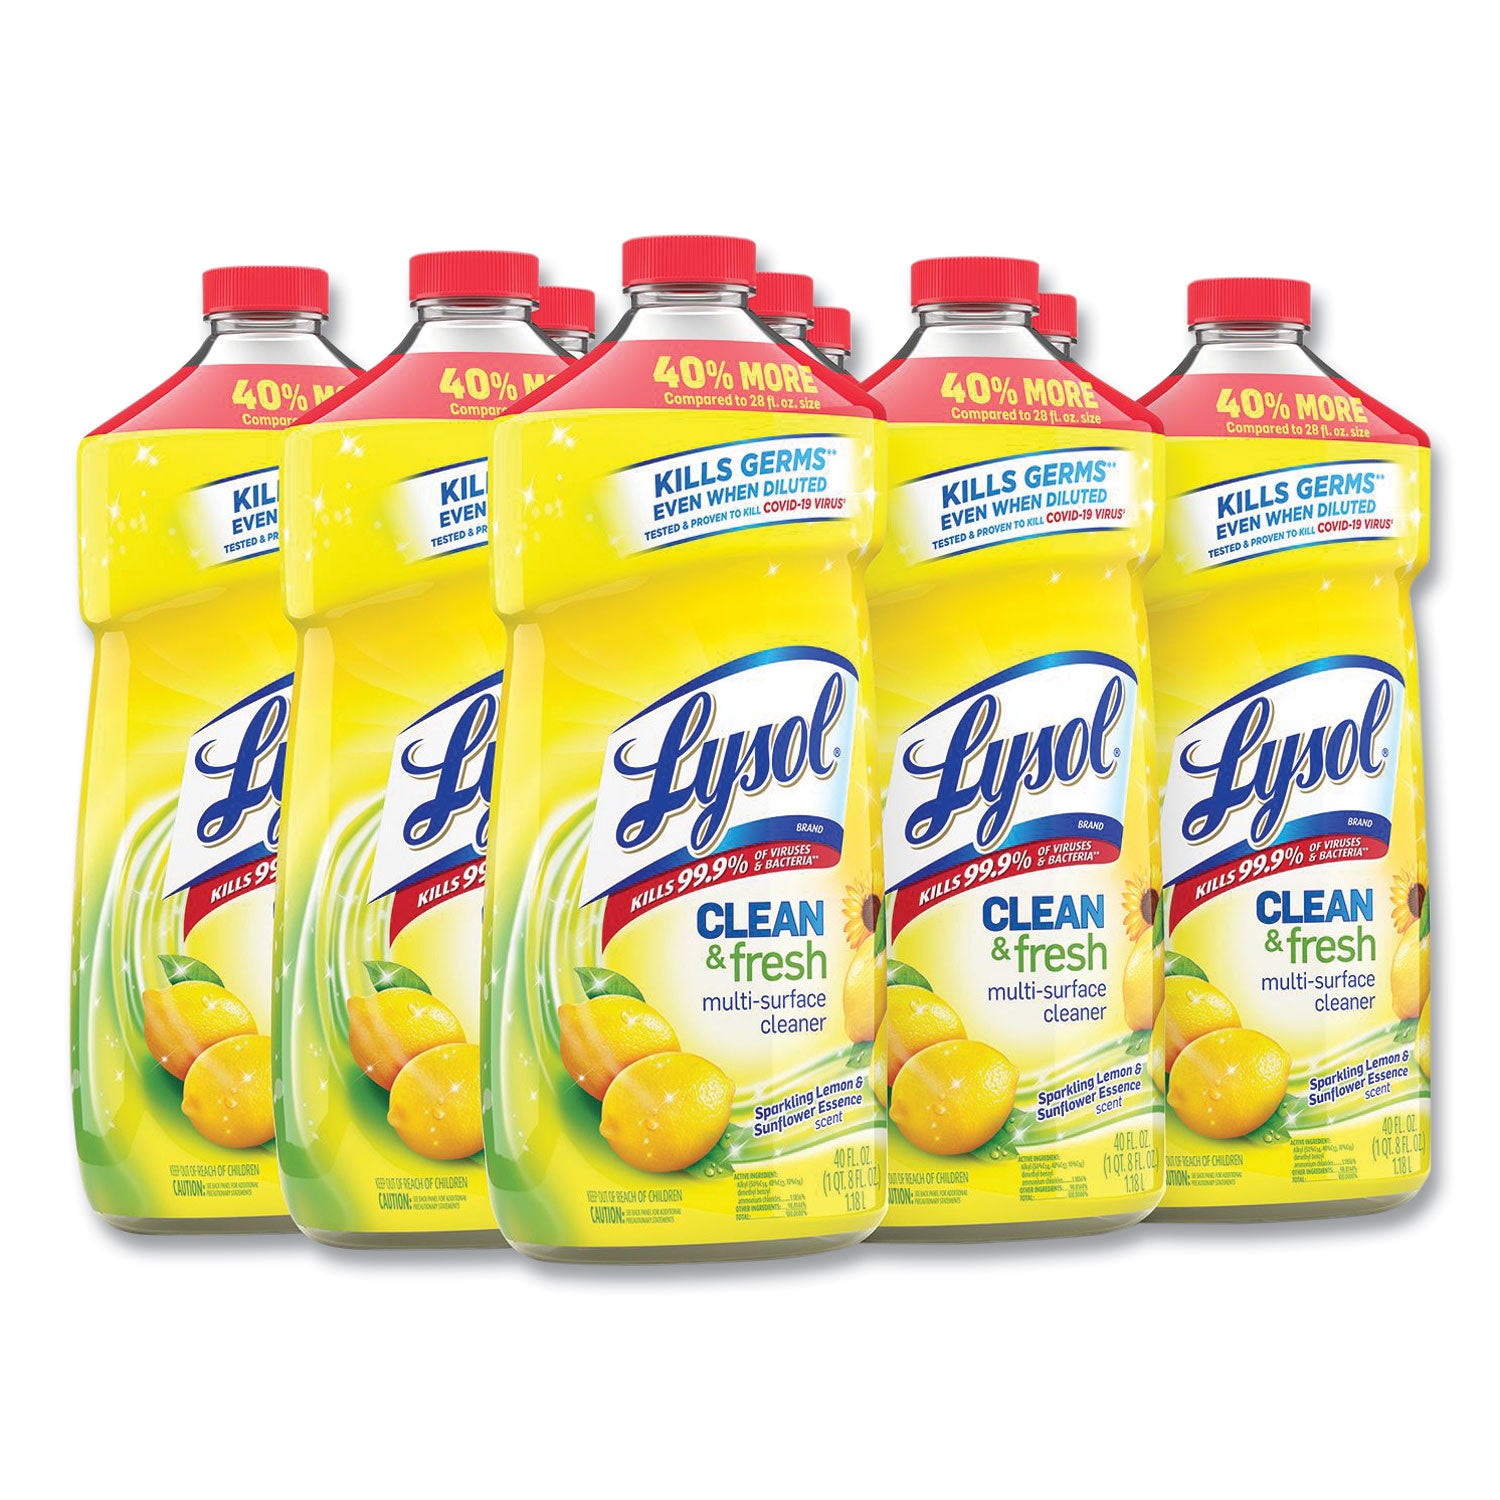 clean-and-fresh-multi-surface-cleaner-sparkling-lemon-and-sunflower-essence-40-oz-bottle-9-carton_rac78626ct - 1